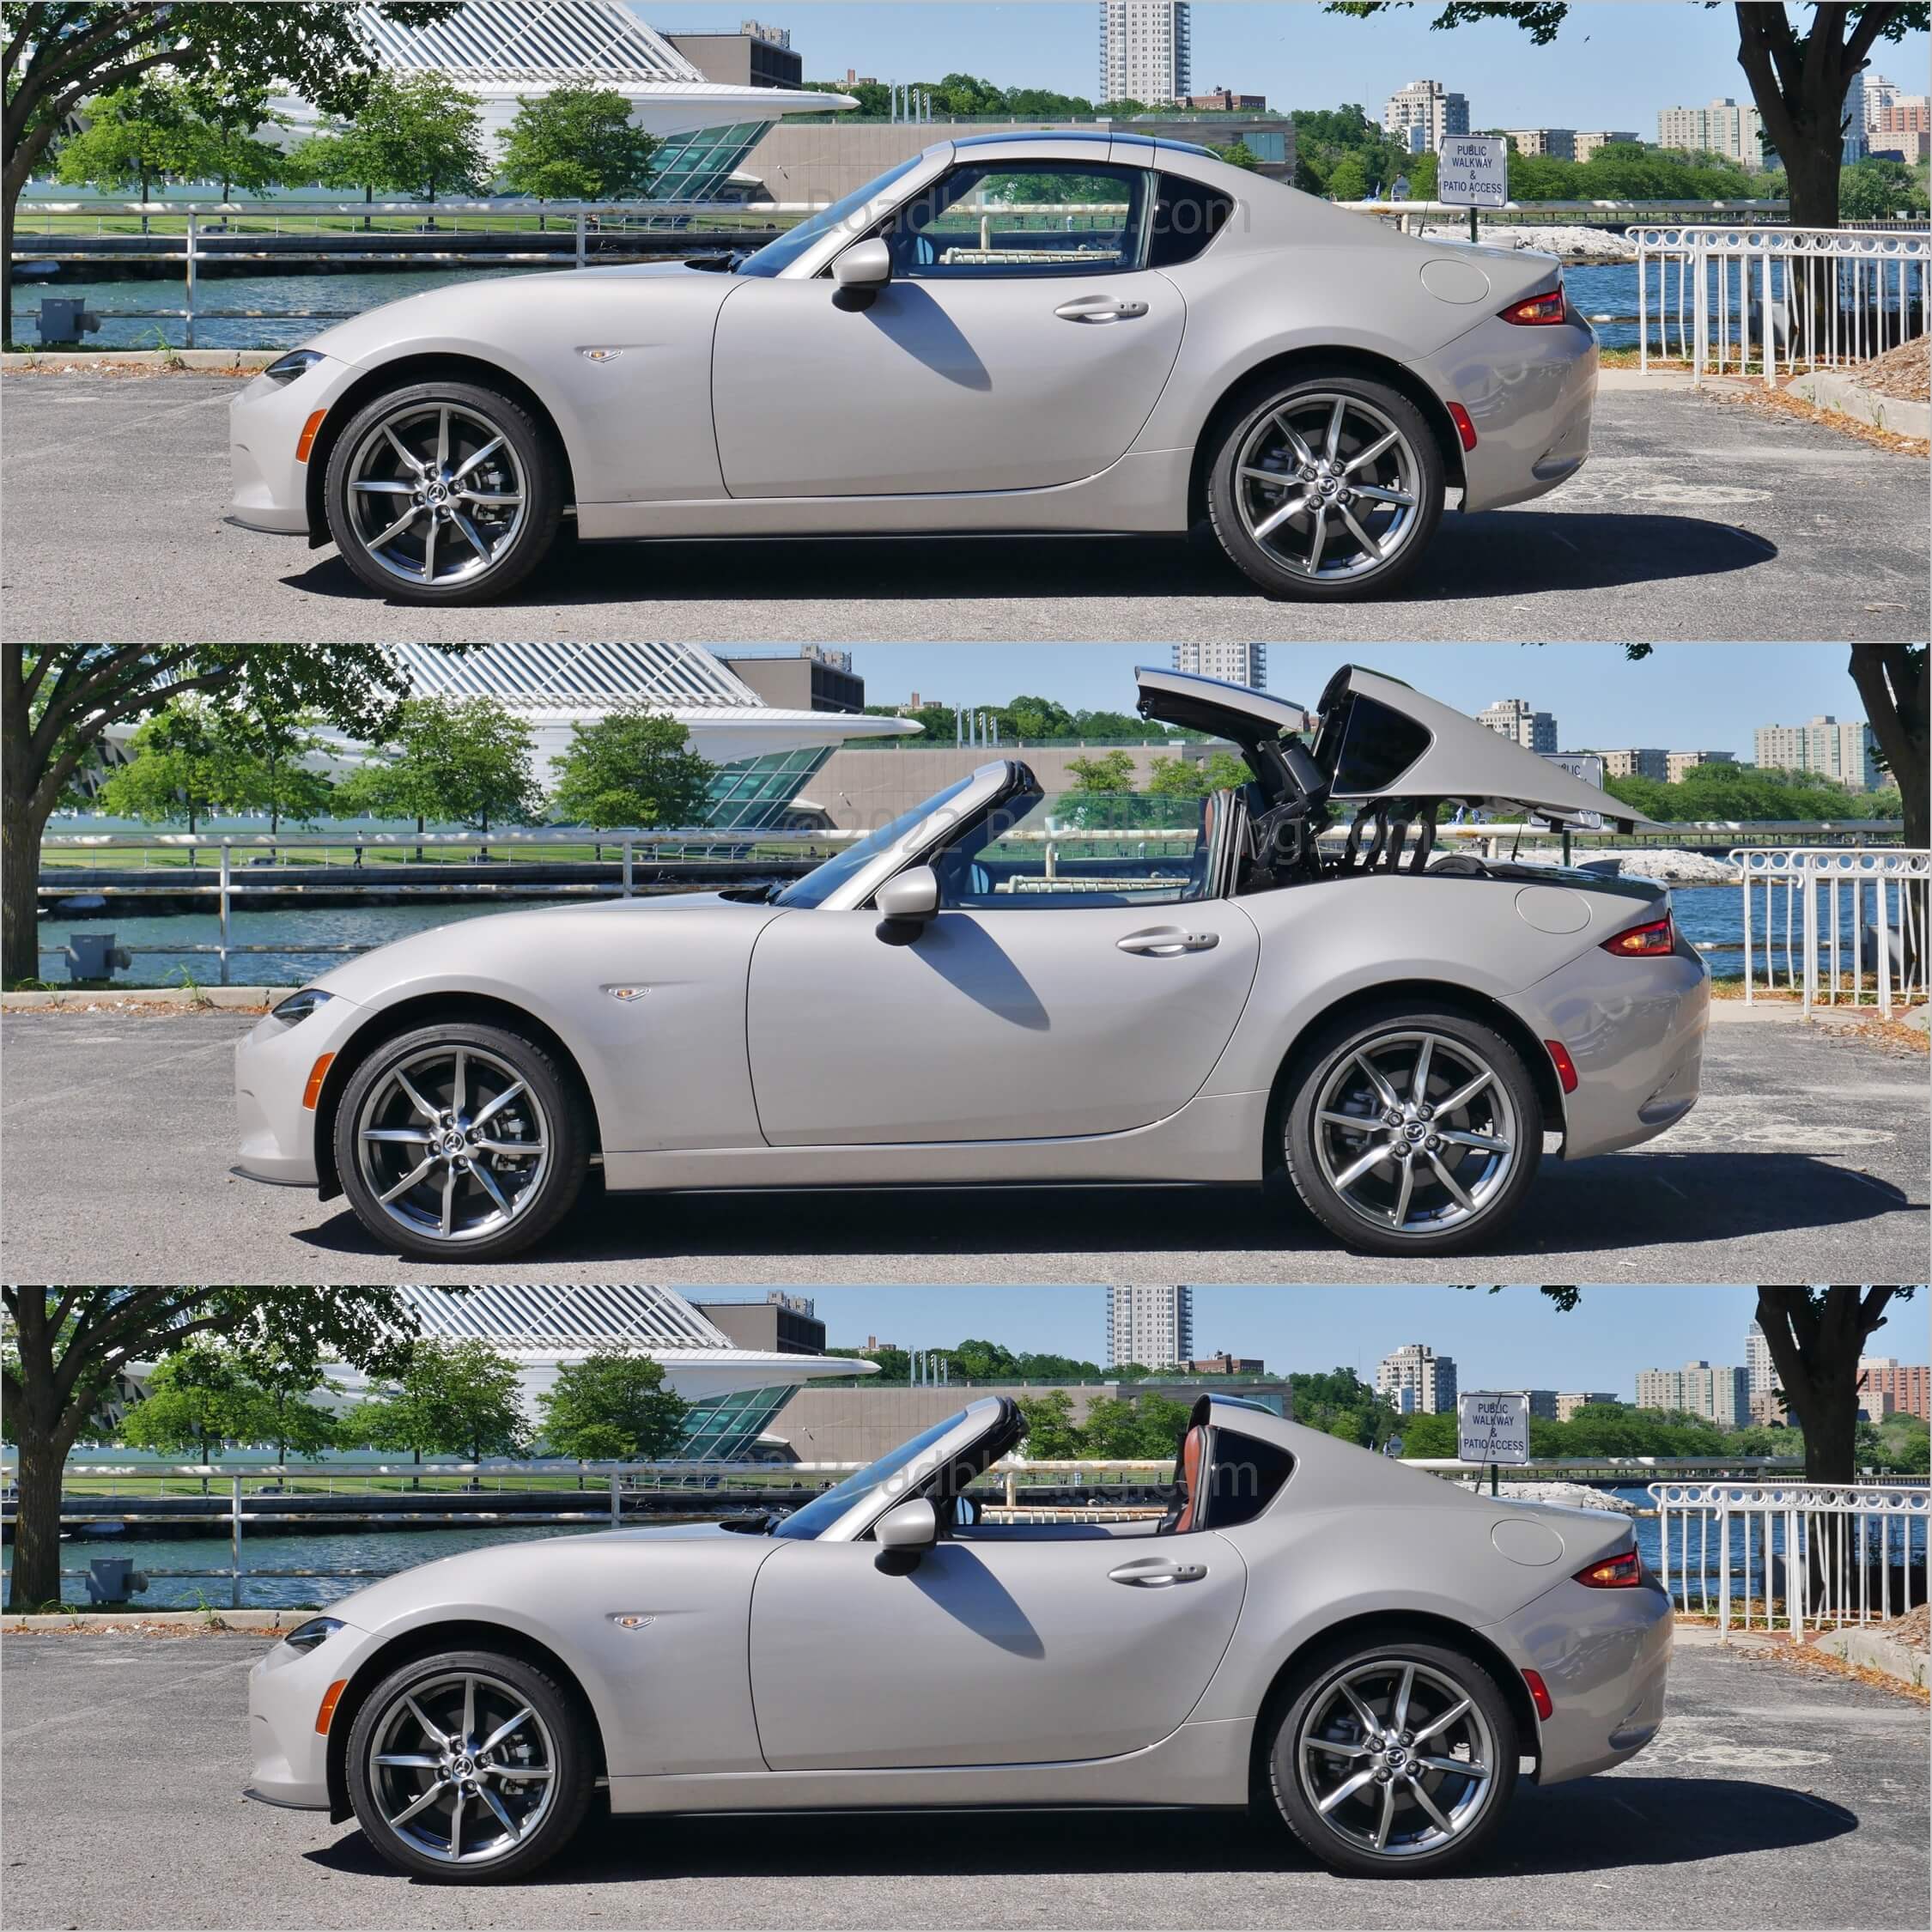 2022 Mazda MX-5 Miata RF: one touch retractable folding hard top operates within 13 seconds at up to 6 mph